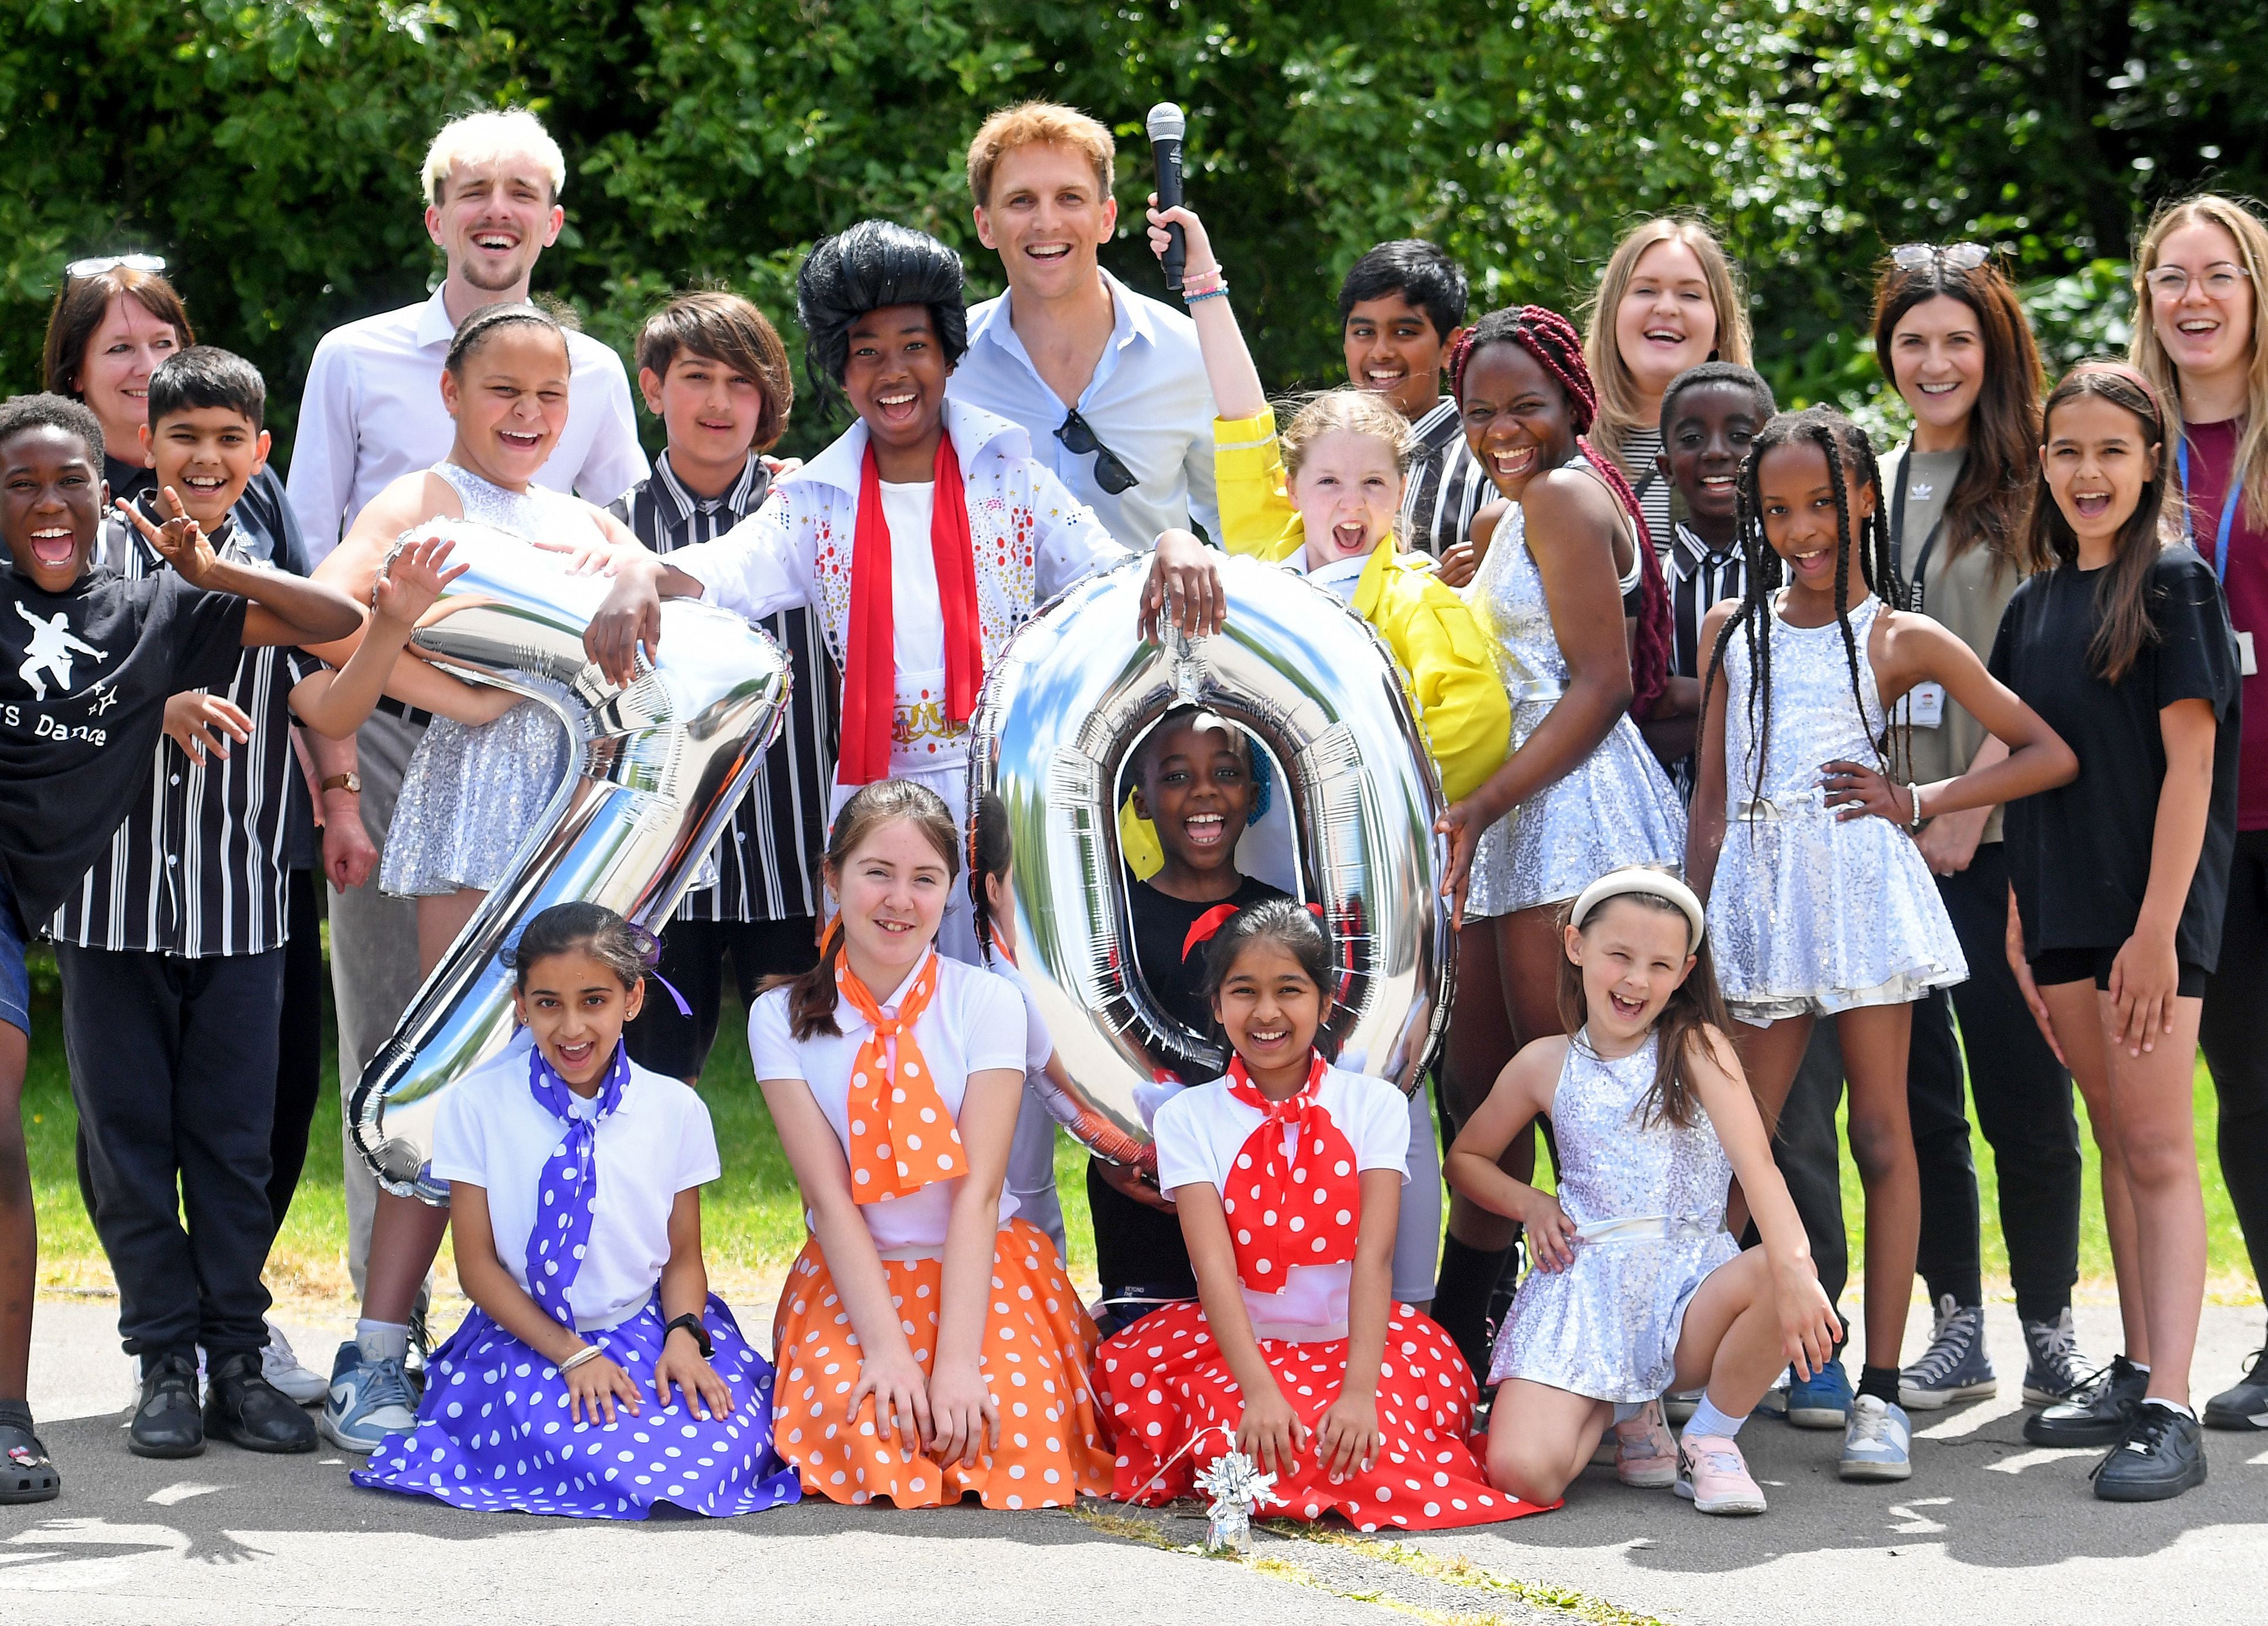 Walsall school pupils set to shine in special 70th anniversary show